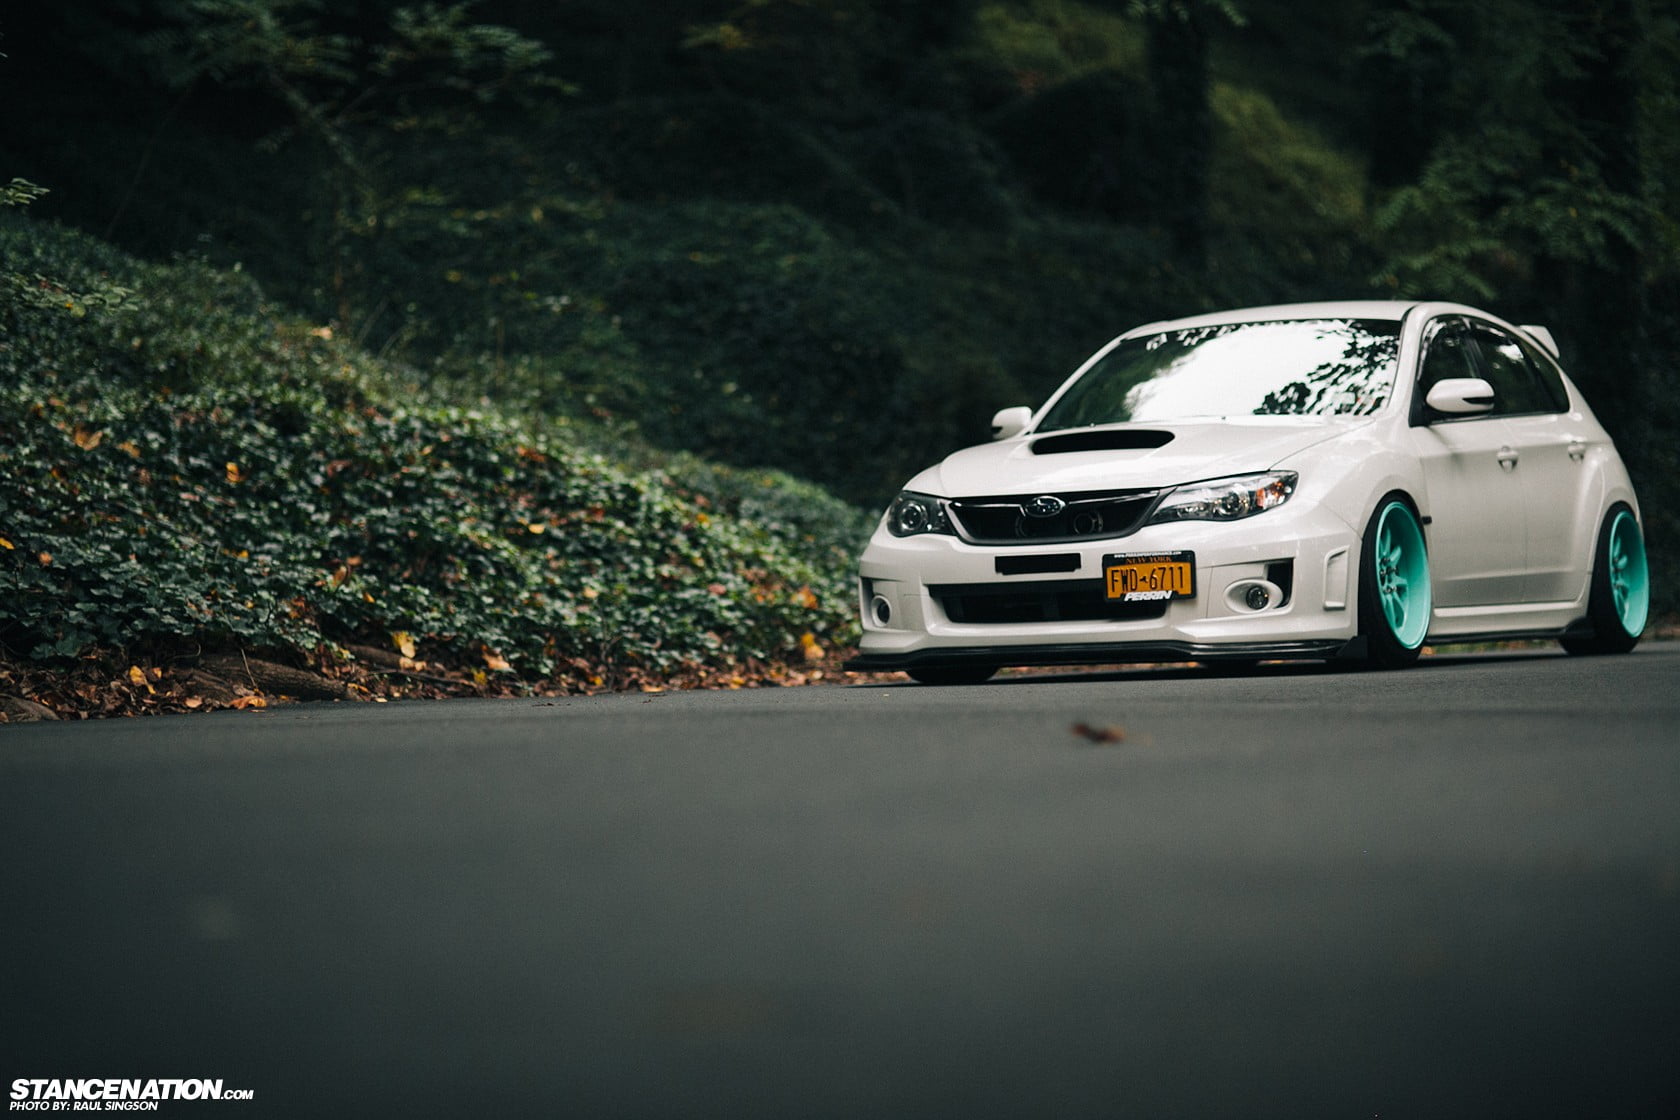 White Wrx With Teal Rims - HD Wallpaper 